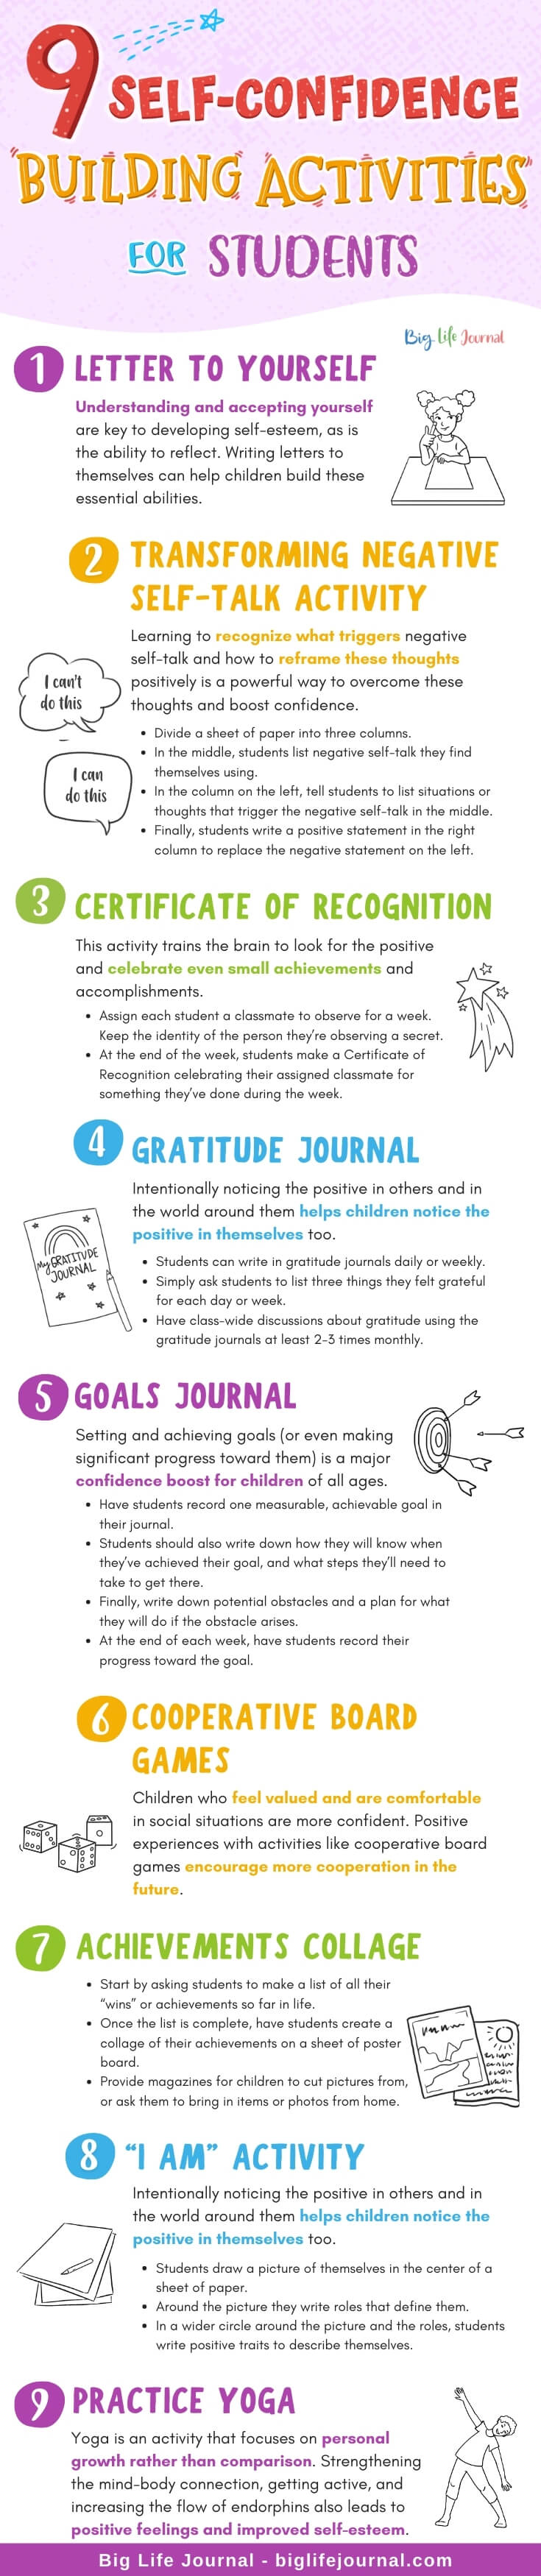 9 Self-Confidence Building Activities for Students